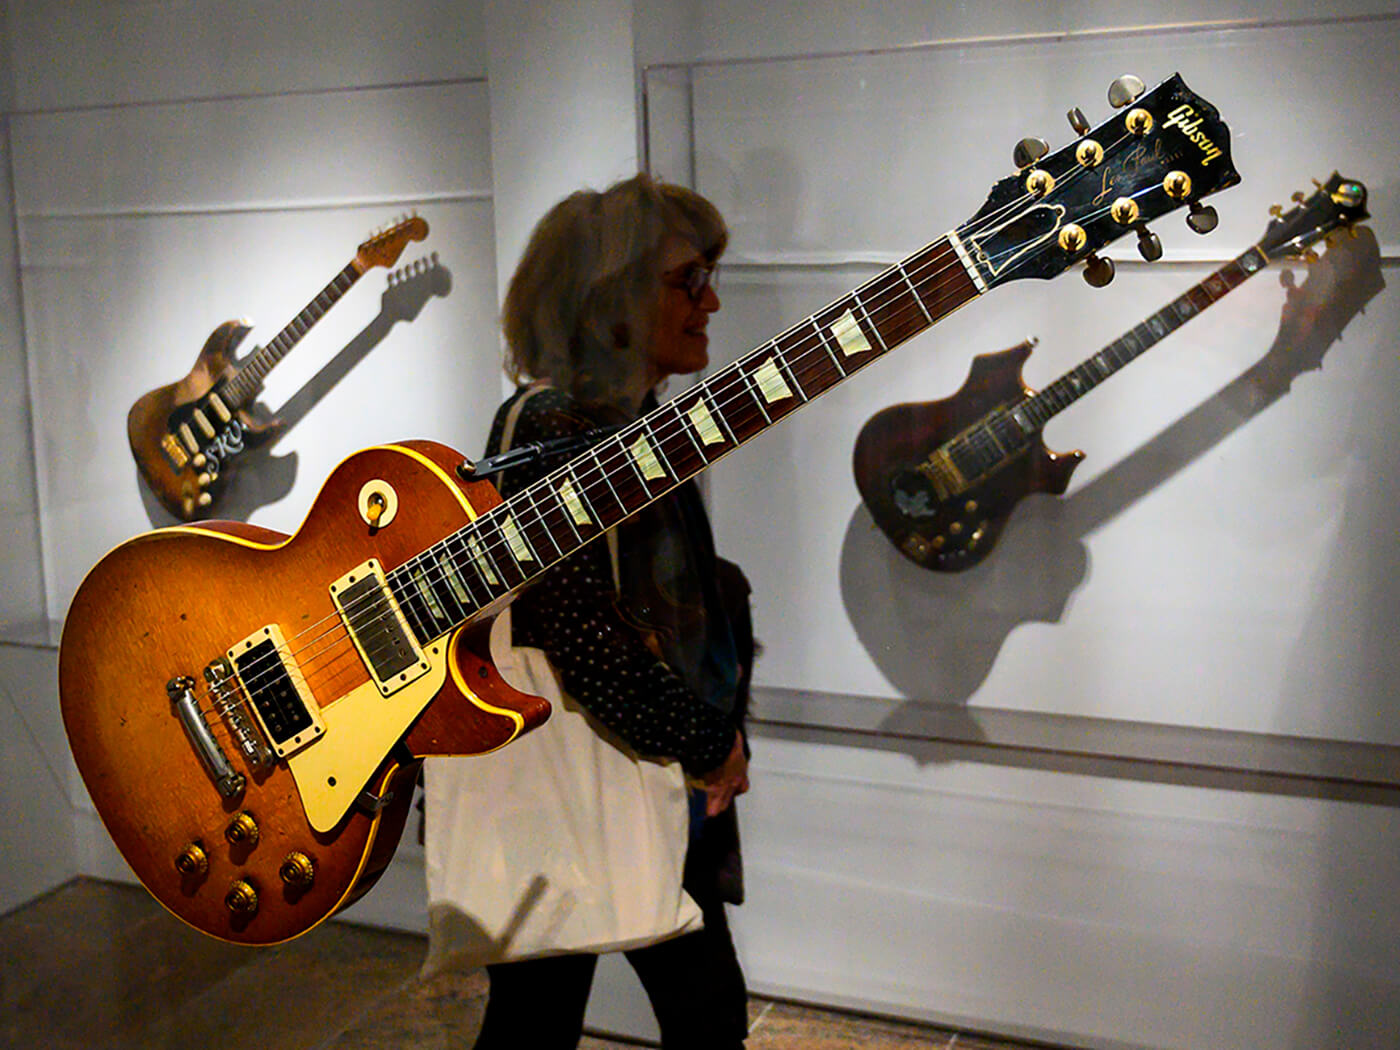 “Number One” belonging to Jimmy Page displayed at an exhibition called “Play It Loud: Instruments of Rock and Roll” at the Met in 2019